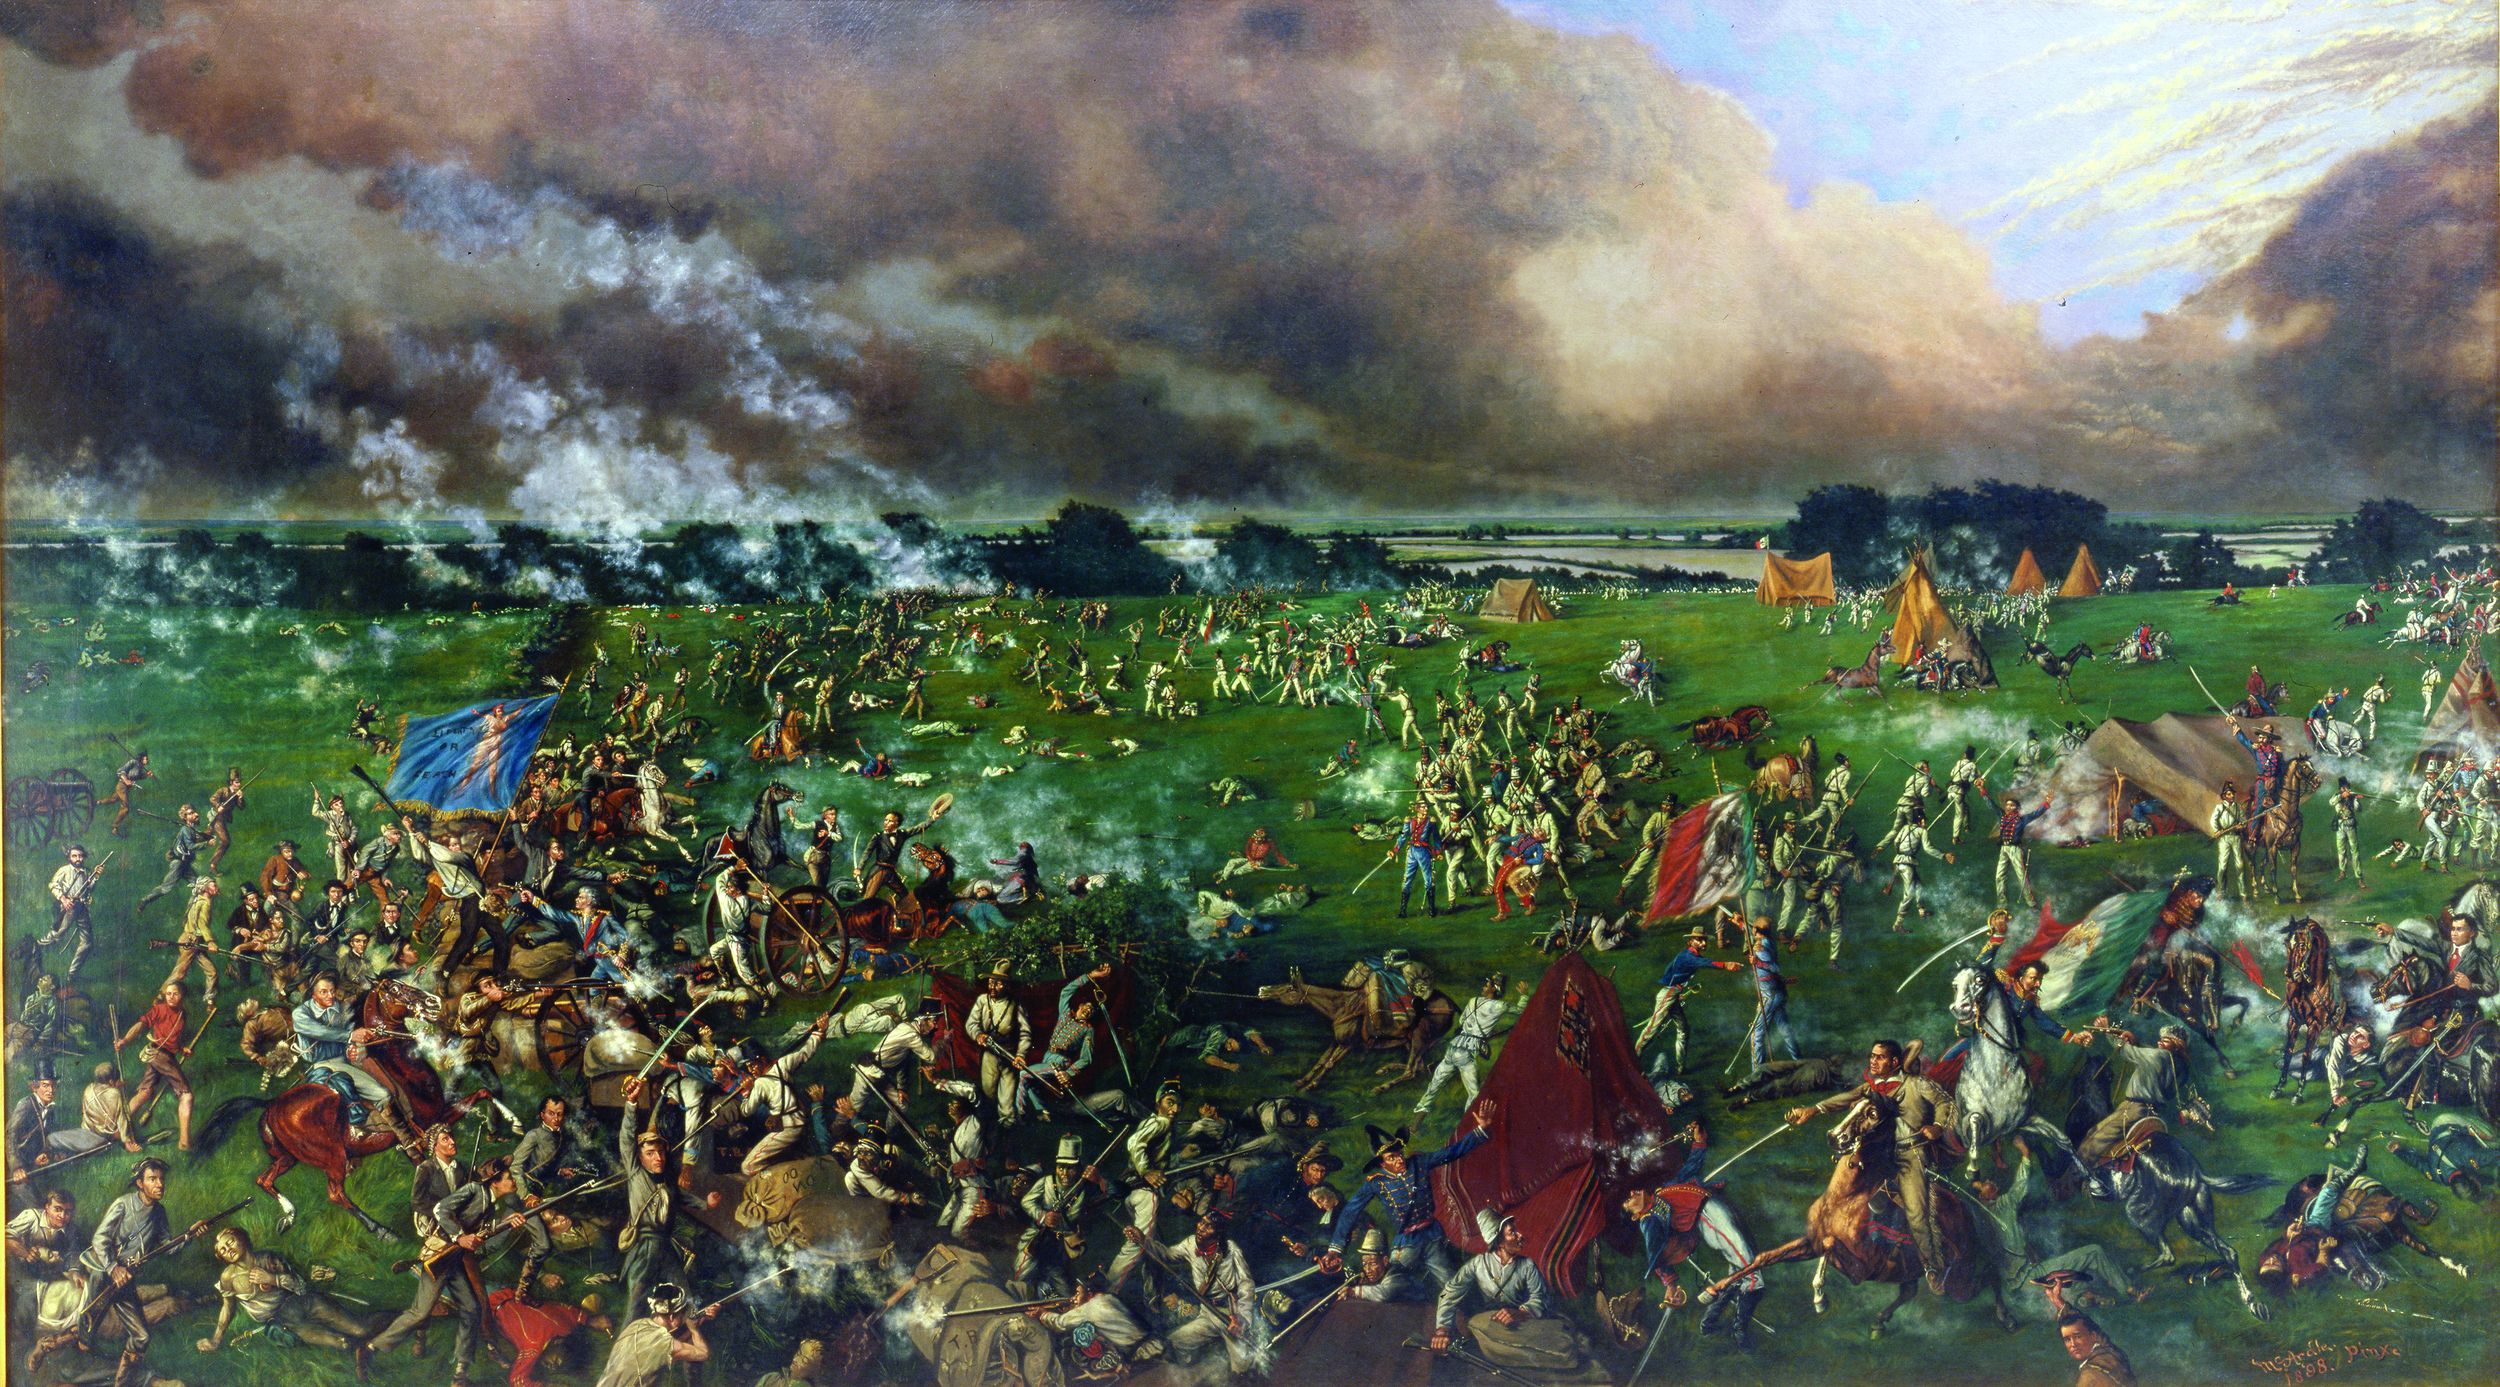 Buckskin-clad Texas troops overrun white-uniformed Mexican forces in this panoramic depiction of the Battle of San Jacinto. The Texans’ victory guaranteed their independence.